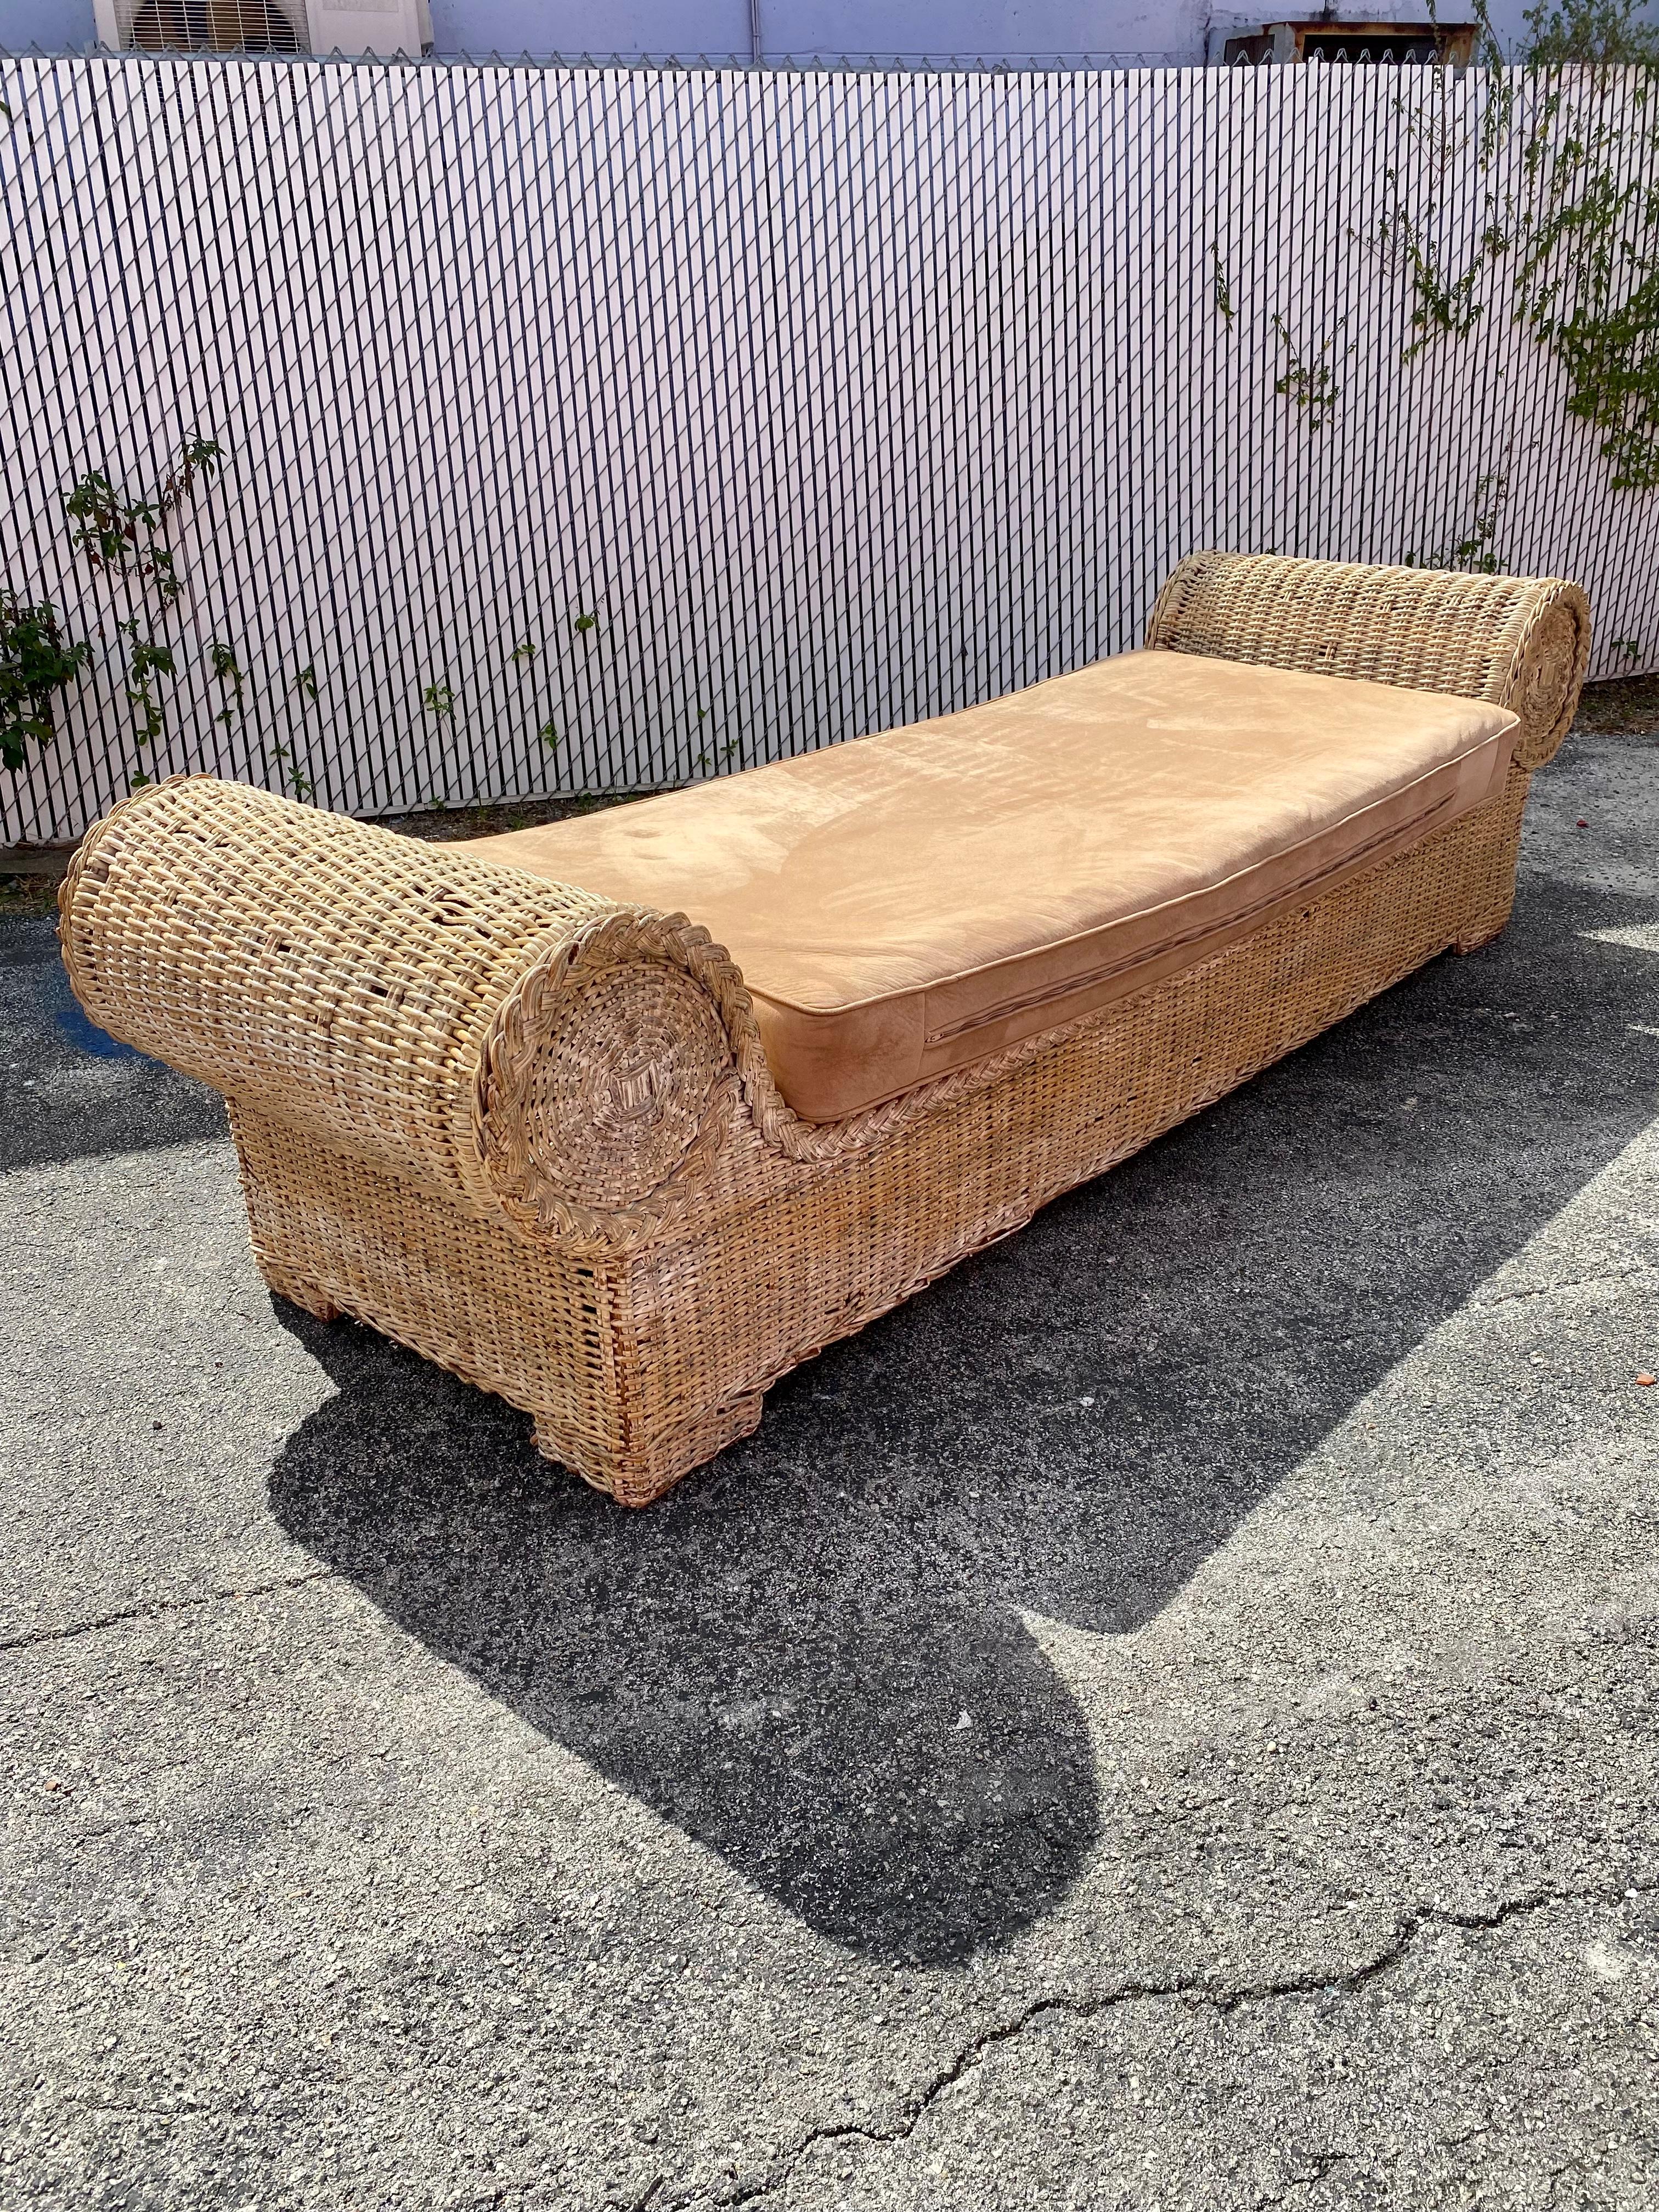 1970s Monumental Rattan Daybed and Chair, Set of 2 In Good Condition For Sale In Fort Lauderdale, FL